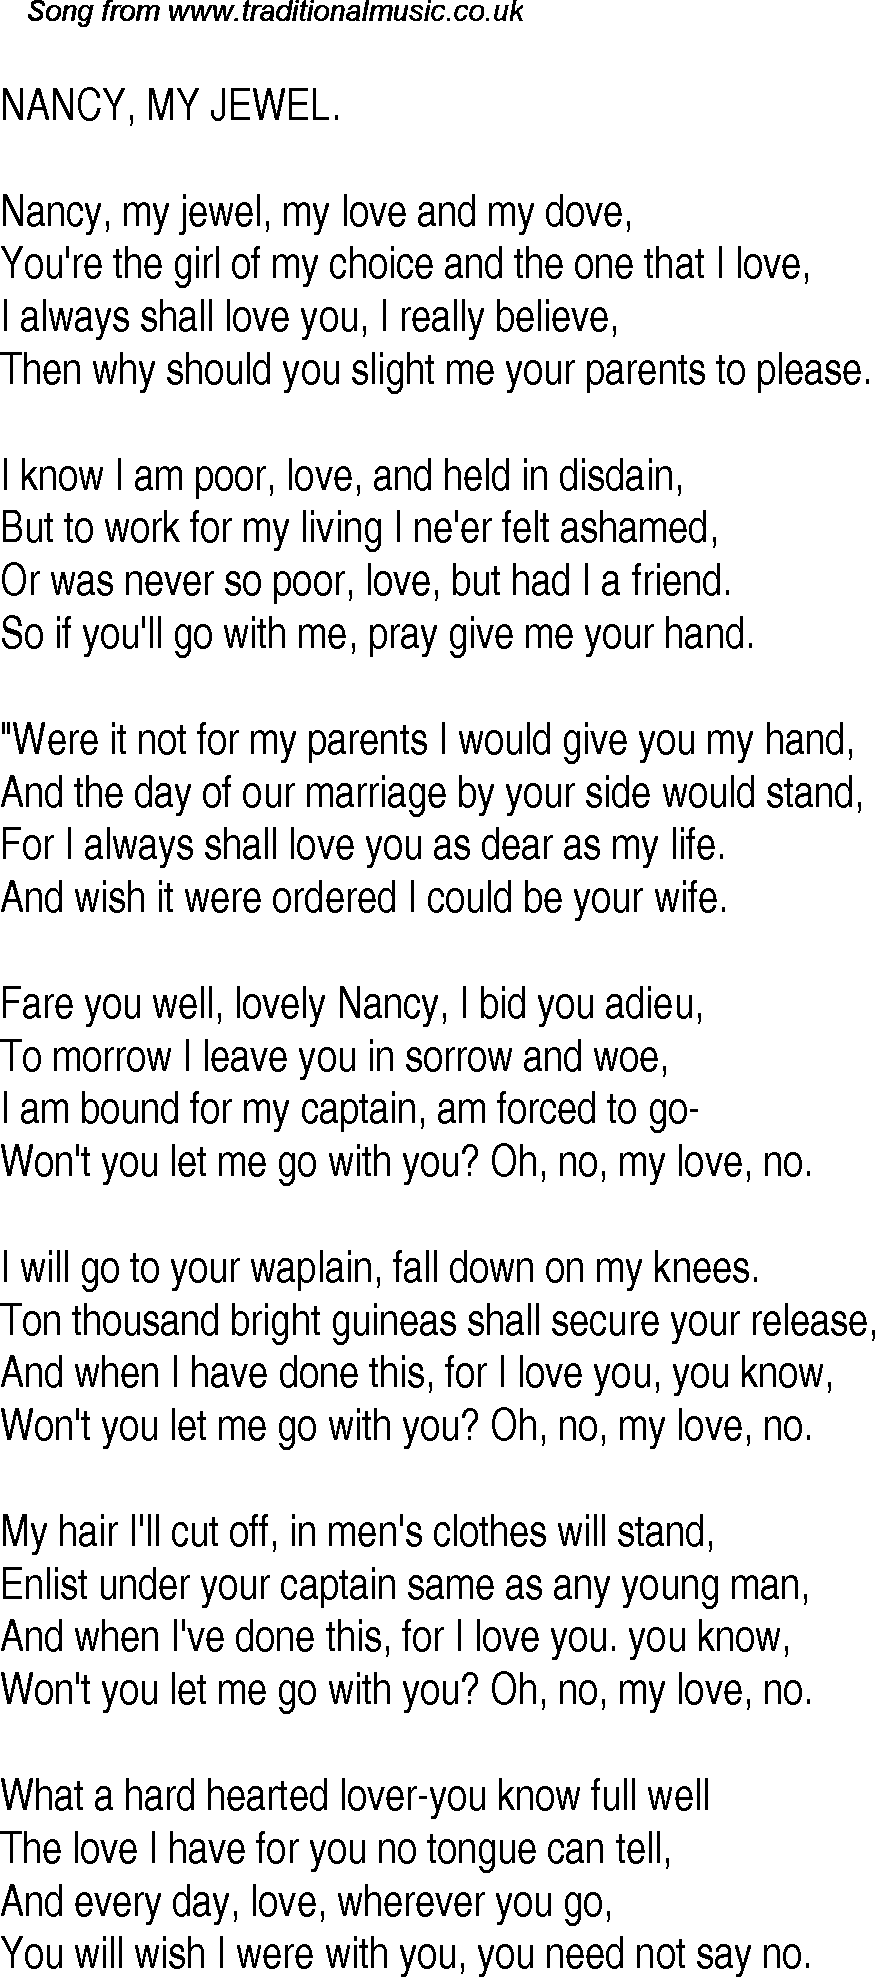 Old Time Song Lyrics for 27 Nancy, My Jewel